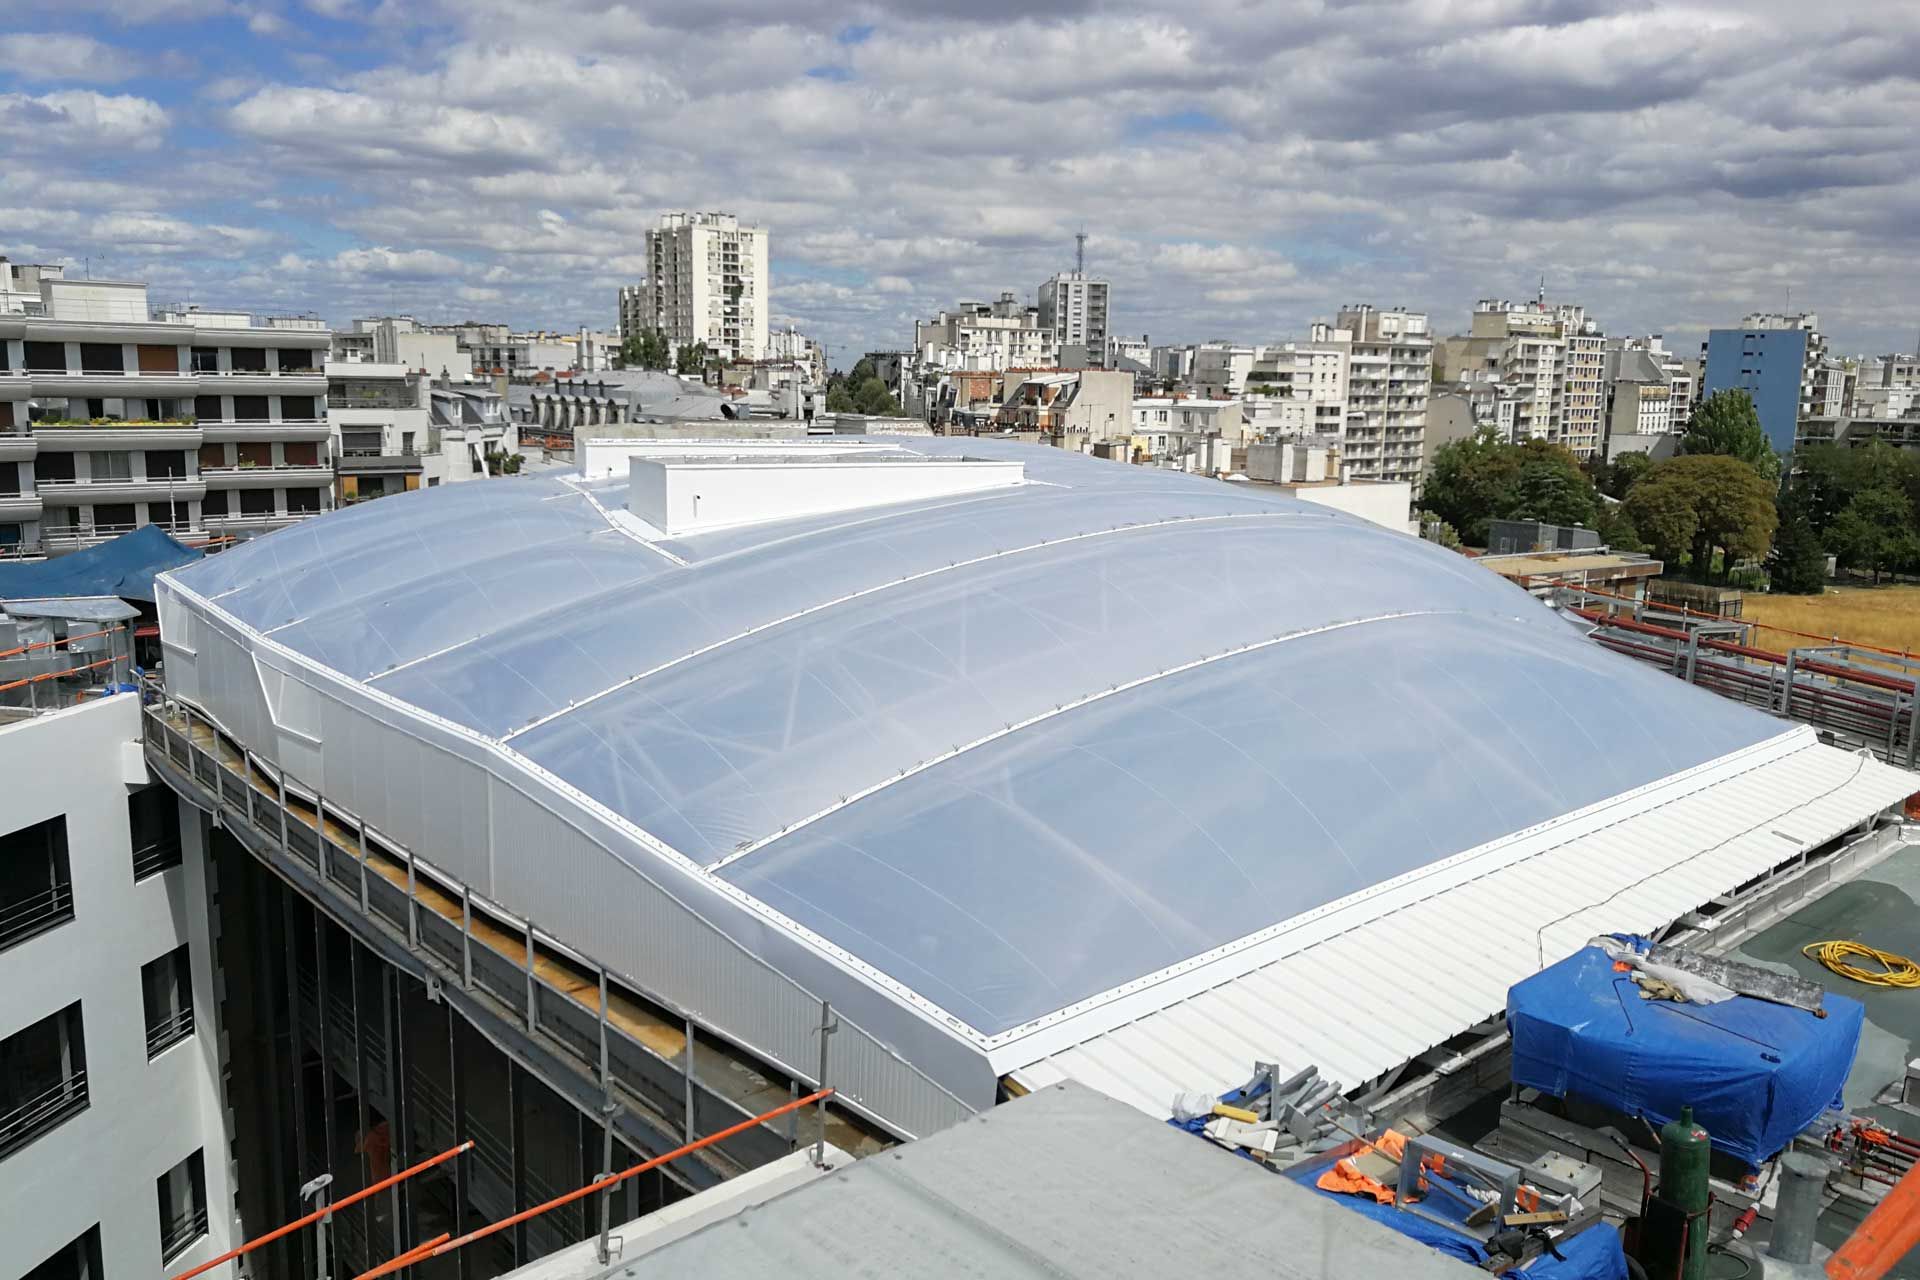 Roof of a building with ETFE